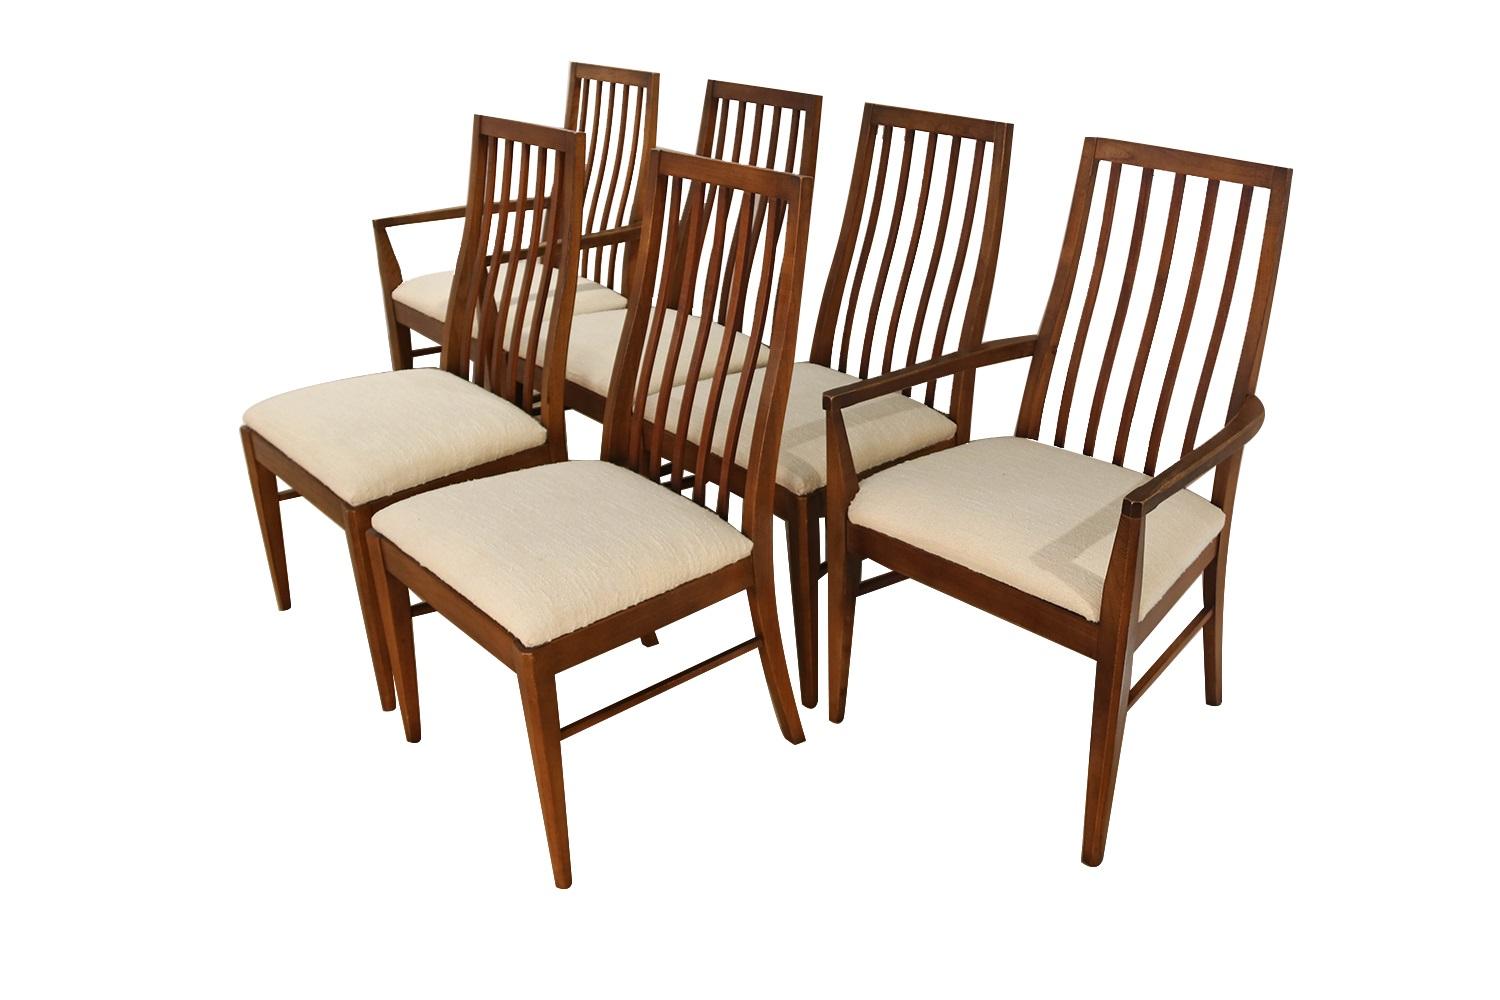 An absolutely stunning set of six Mid-Century Modern Lane First Edition dining chairs manufactured by Lane Furniture. These gorgeous chairs feature beautifully sculpted walnut frames with spindle curved backs providing lumbar support, making these